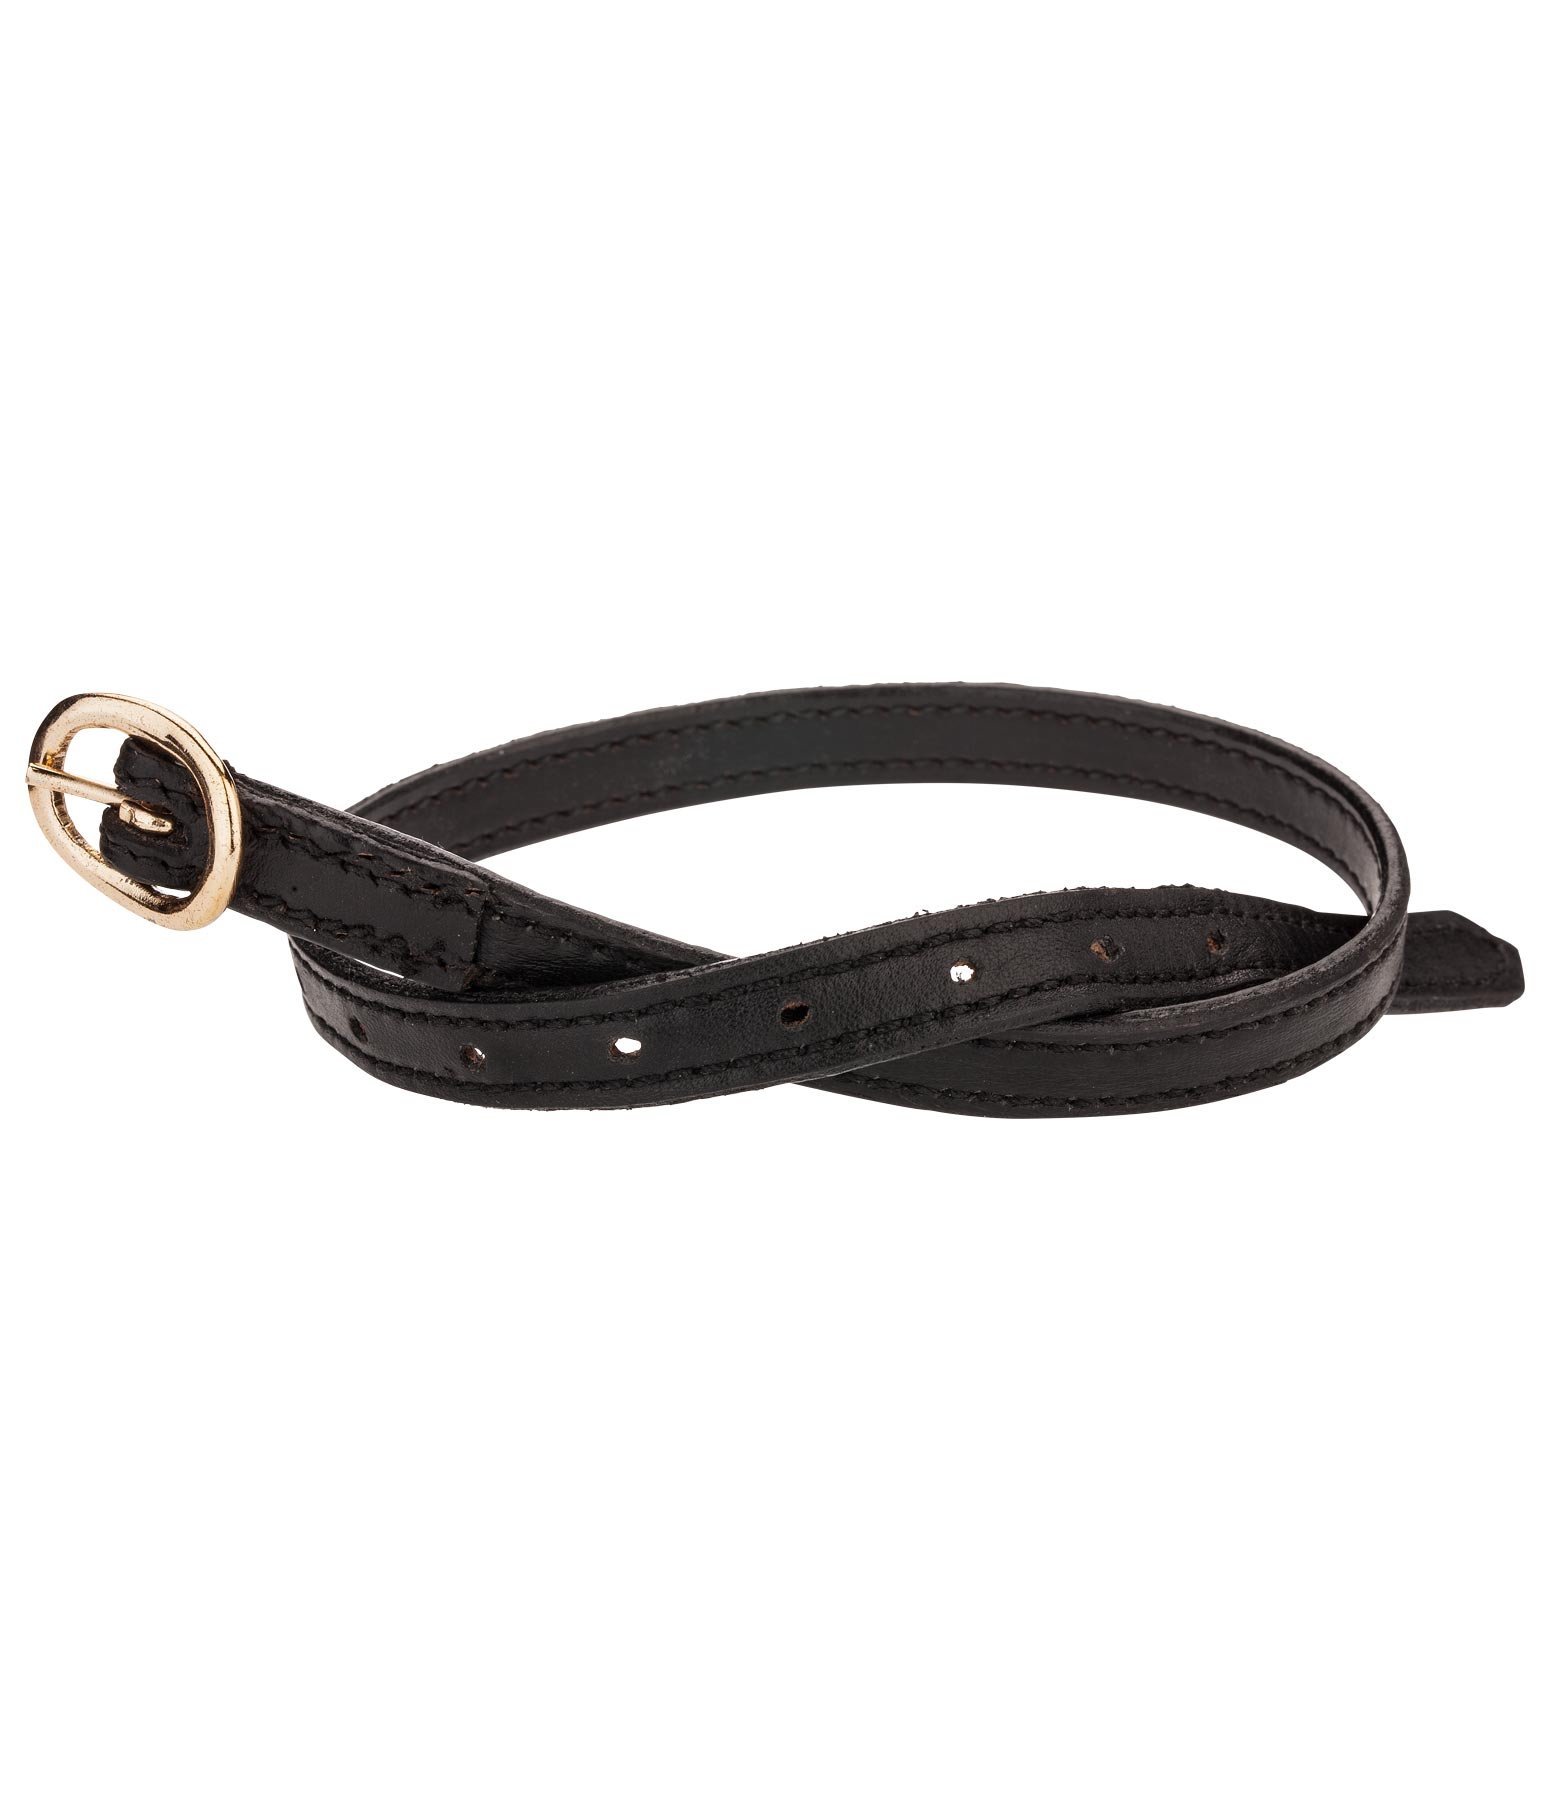 Spur Straps Deluxe